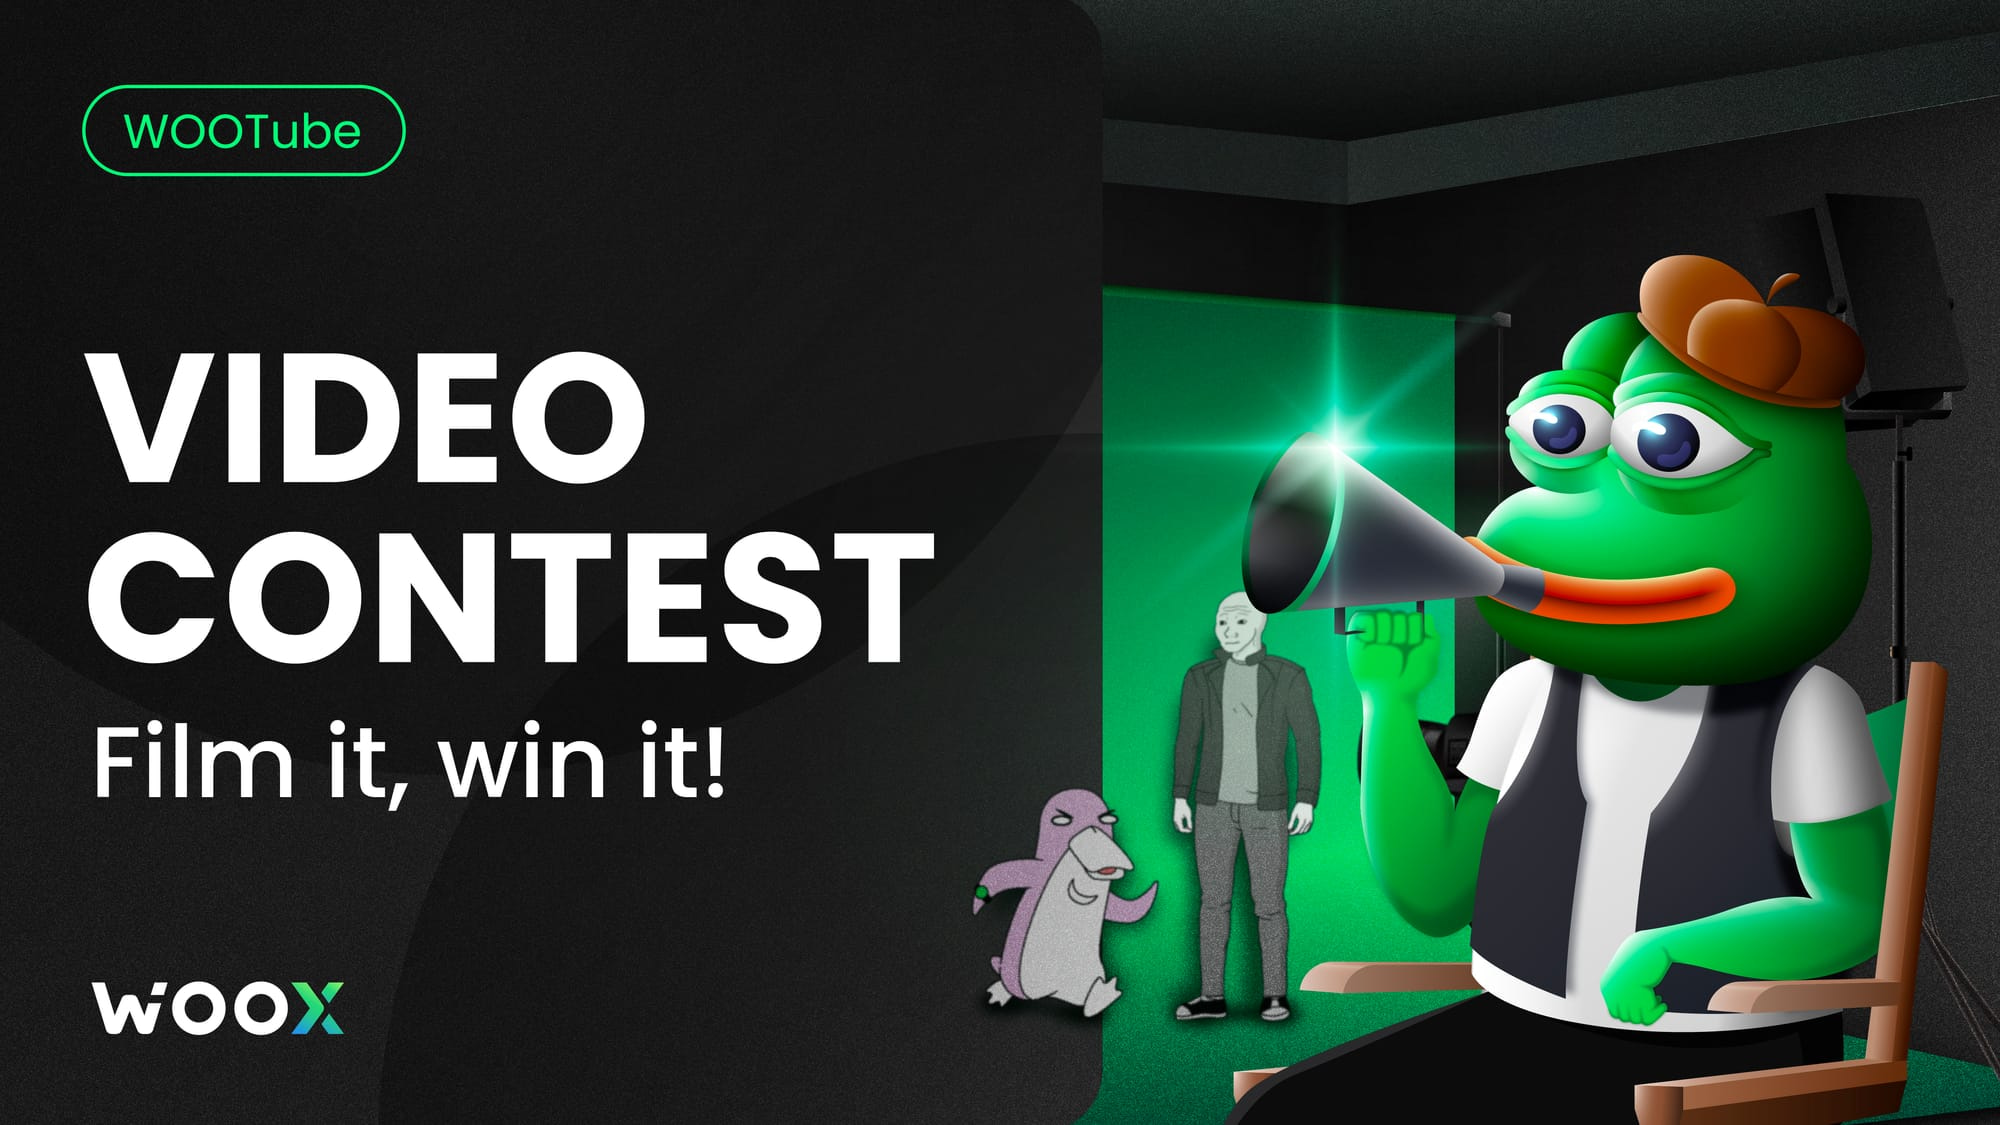 WOOTube video contest! – An opportunity at a 31,500 $WOO Prize Pool